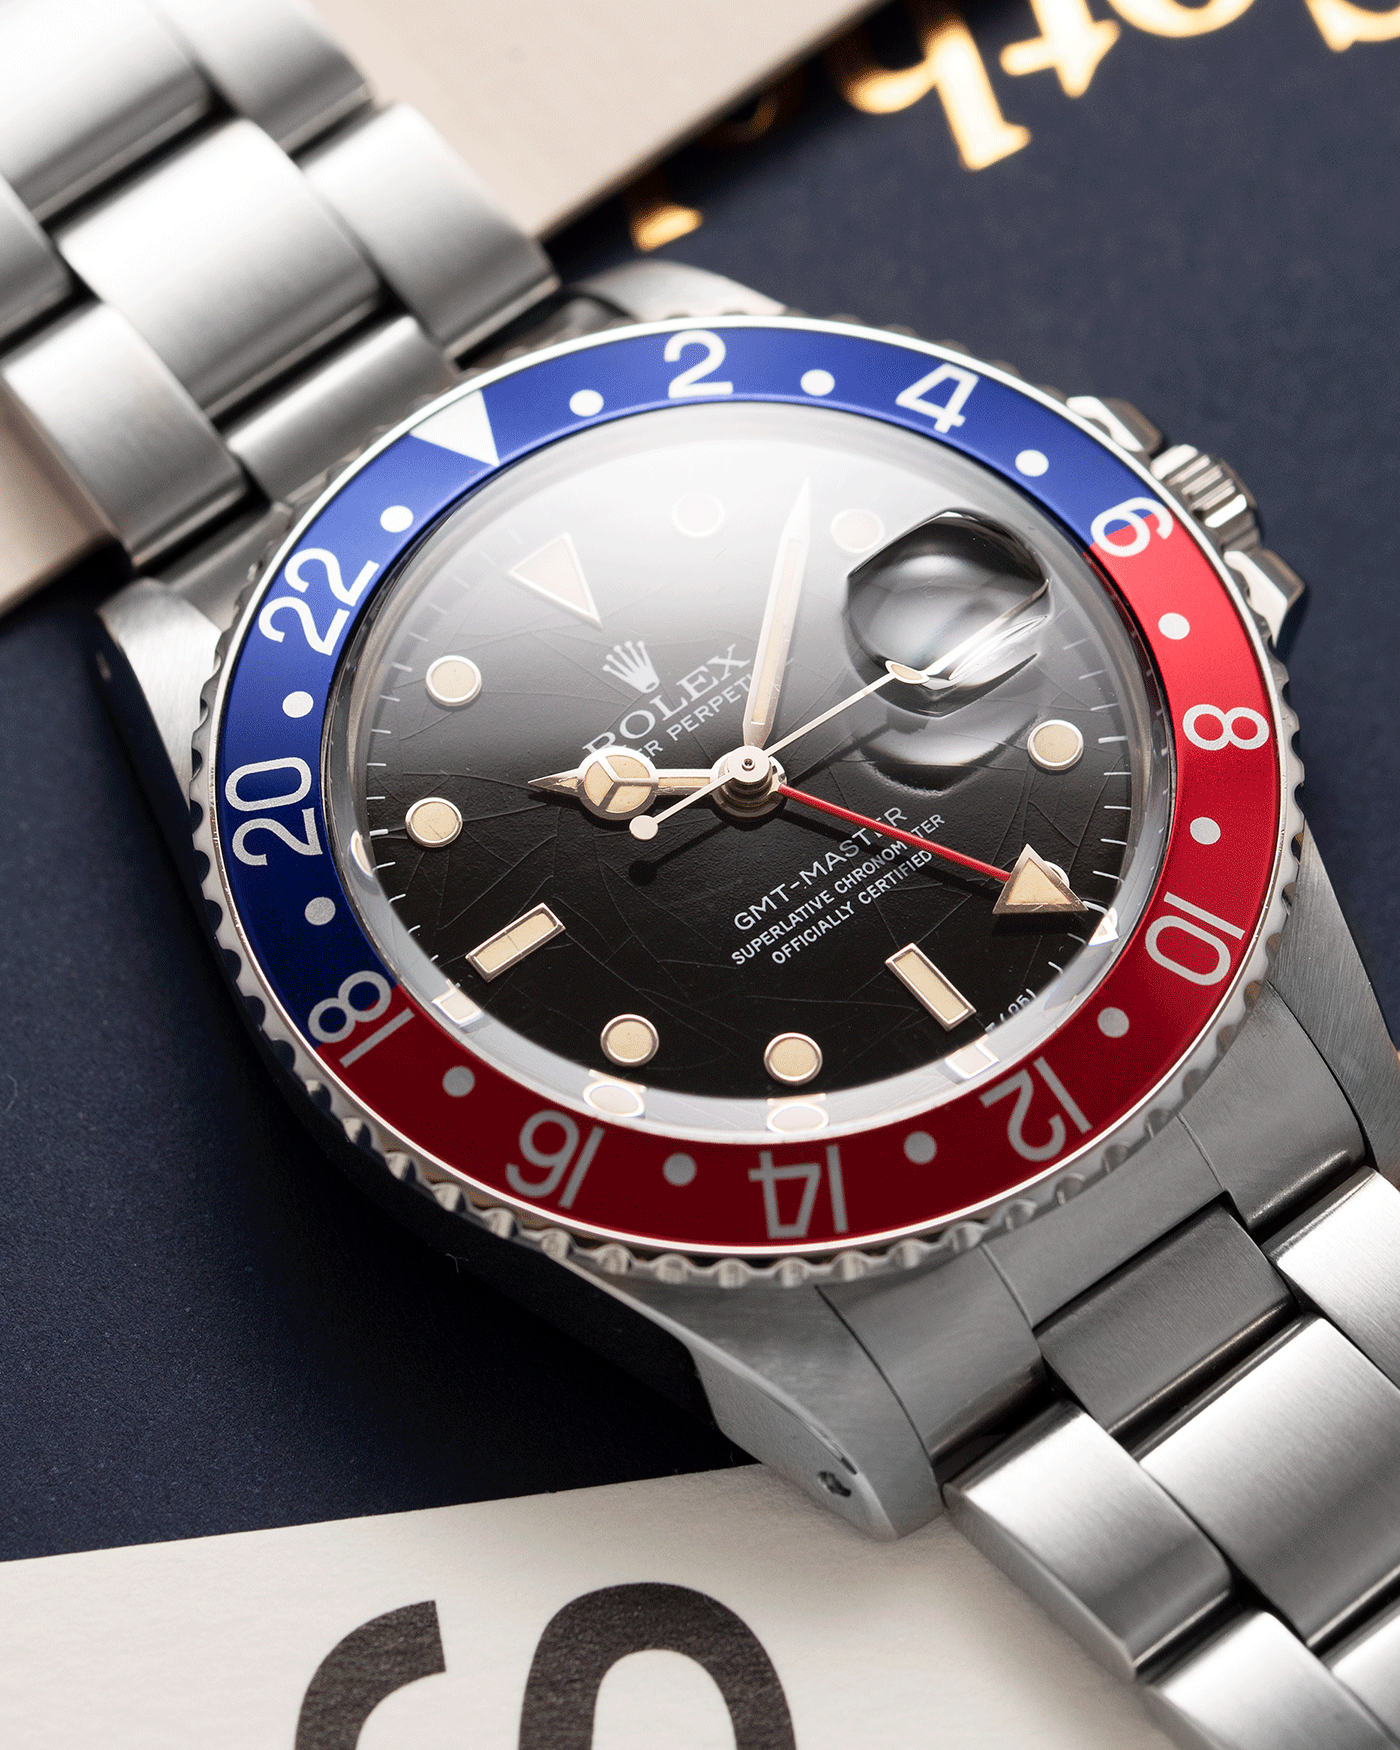 Brand: Rolex Year: 1985 Model: GMT-Master Reference Number: 16750 Gloss Dial Serial Number: 8,71X,XXX Material: Stainless Steel Movement: Cal. 3075 Case Diameter: 40mm Lug Width: 20mm Bracelet: 78360 with 501B end links 